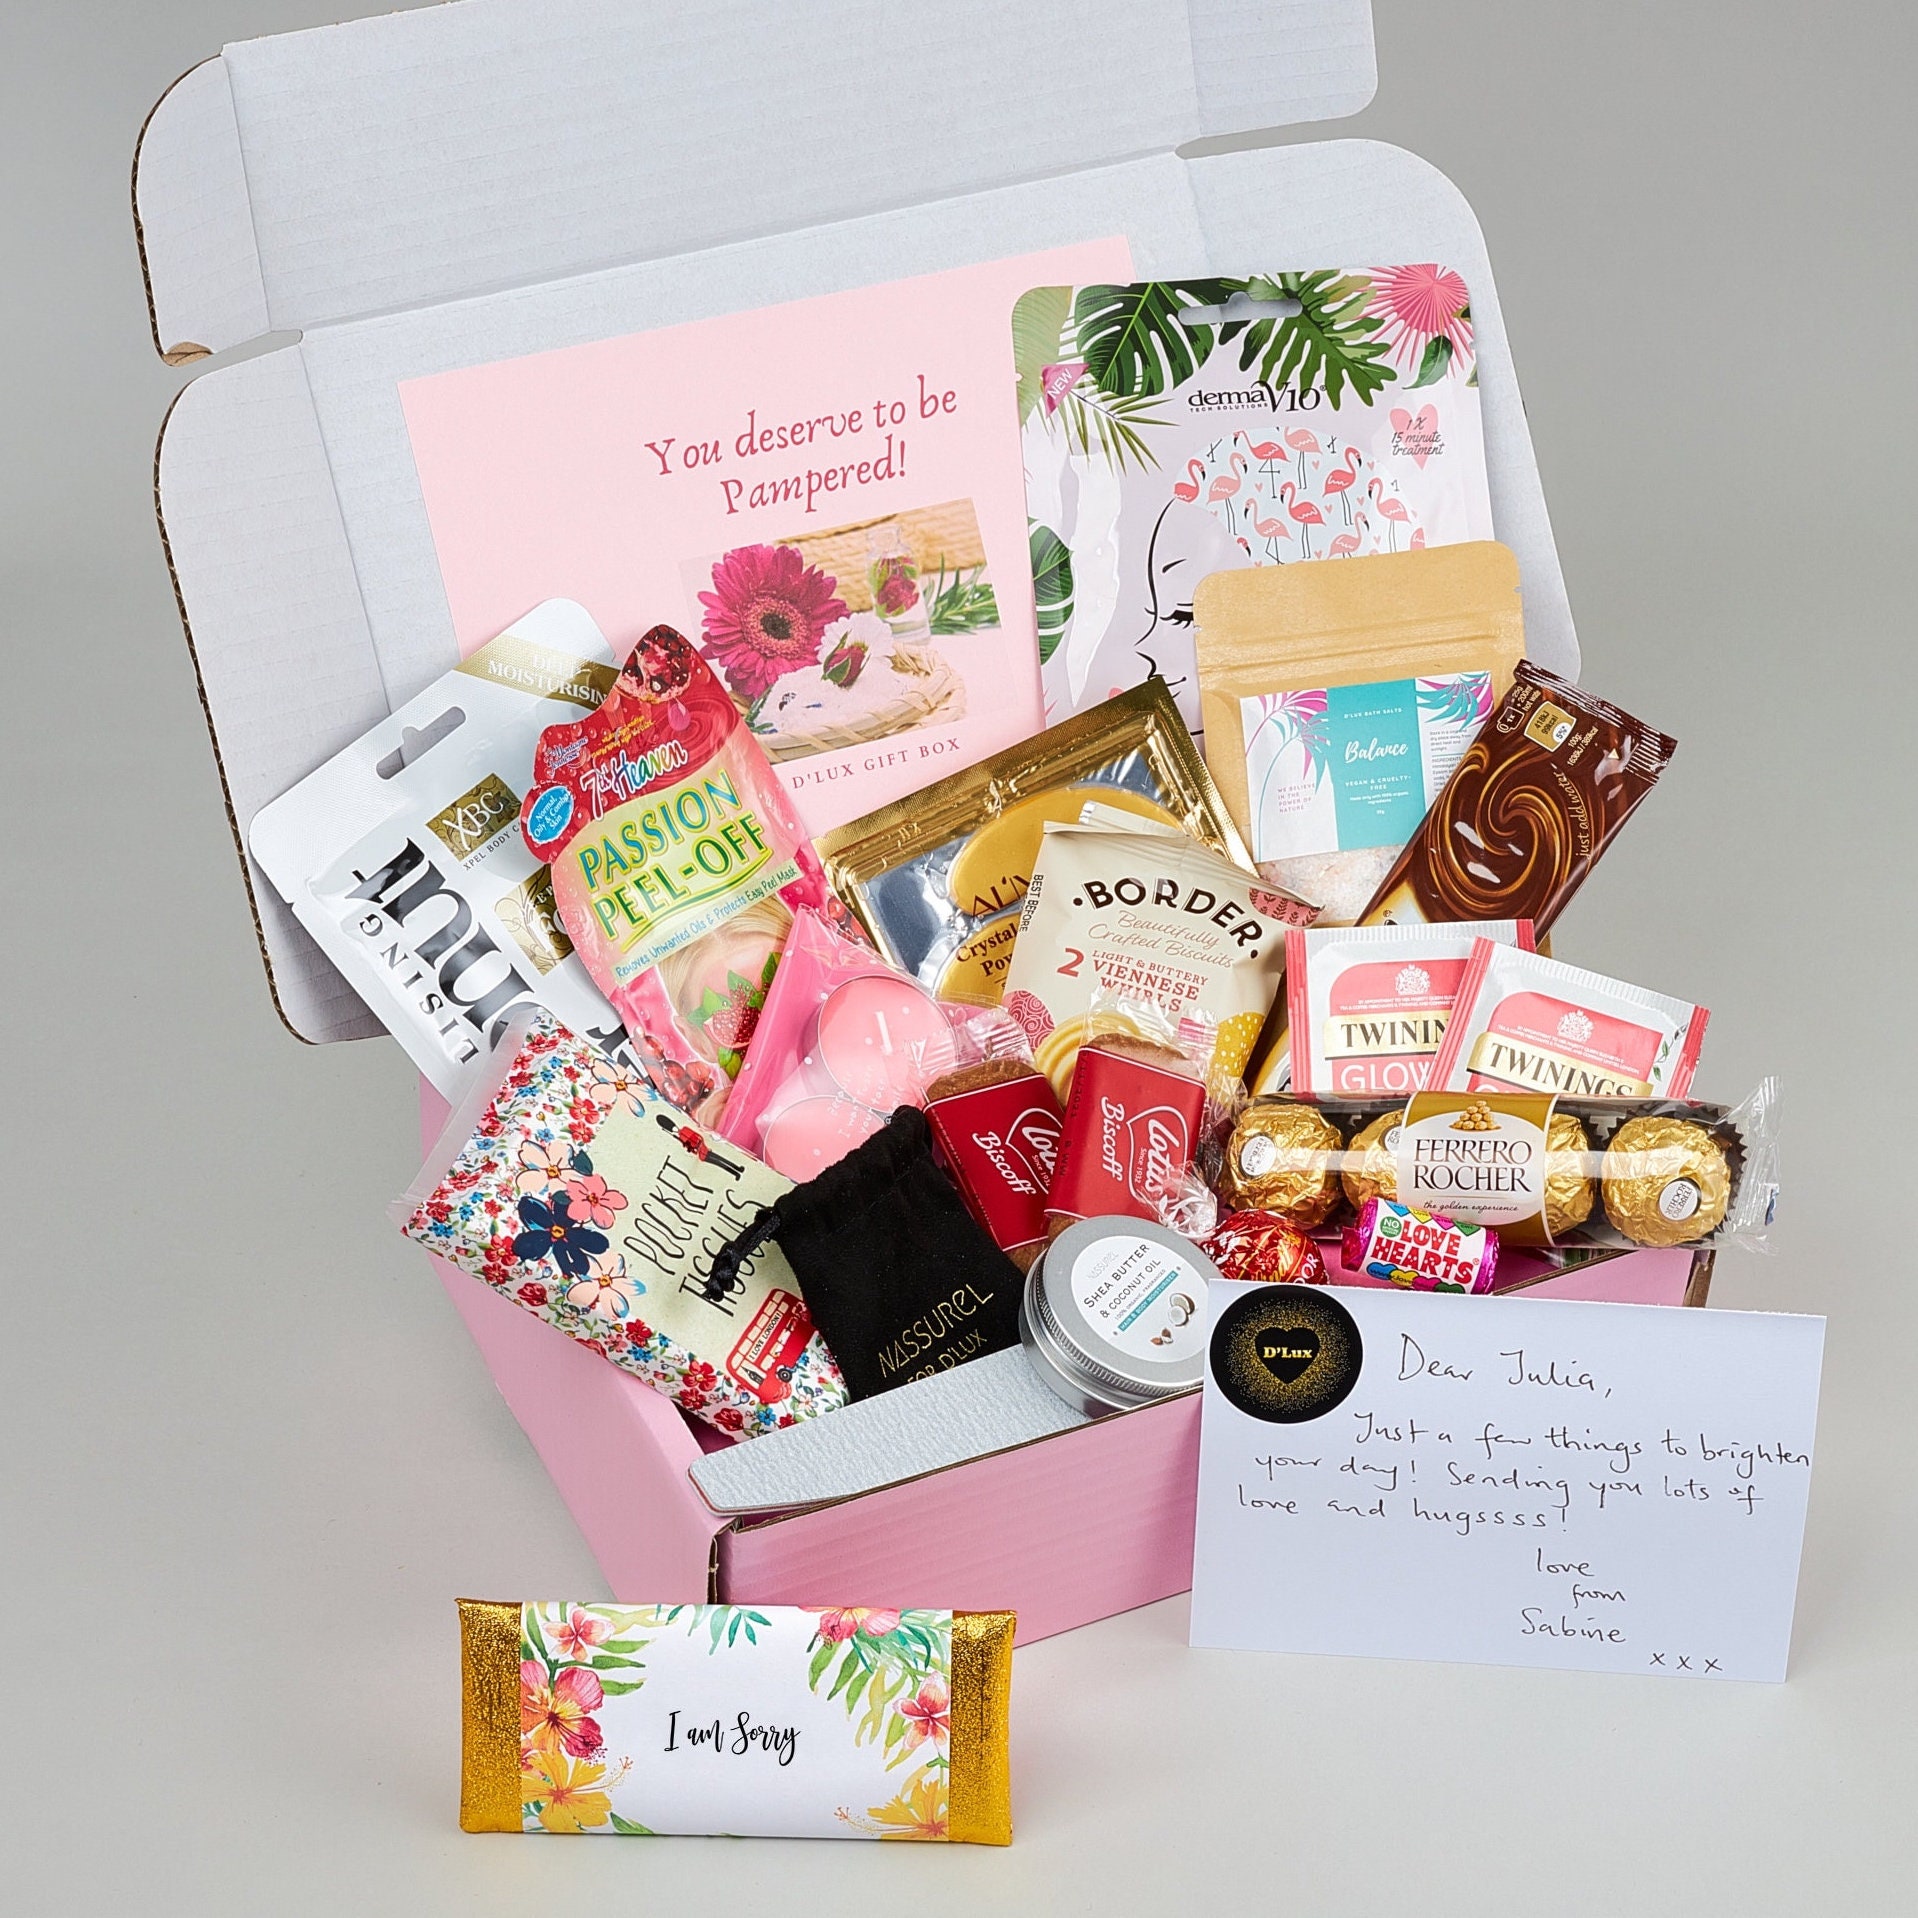 13 Thoughtful Breakup Gifts for a Grieving Friend | theSkimm